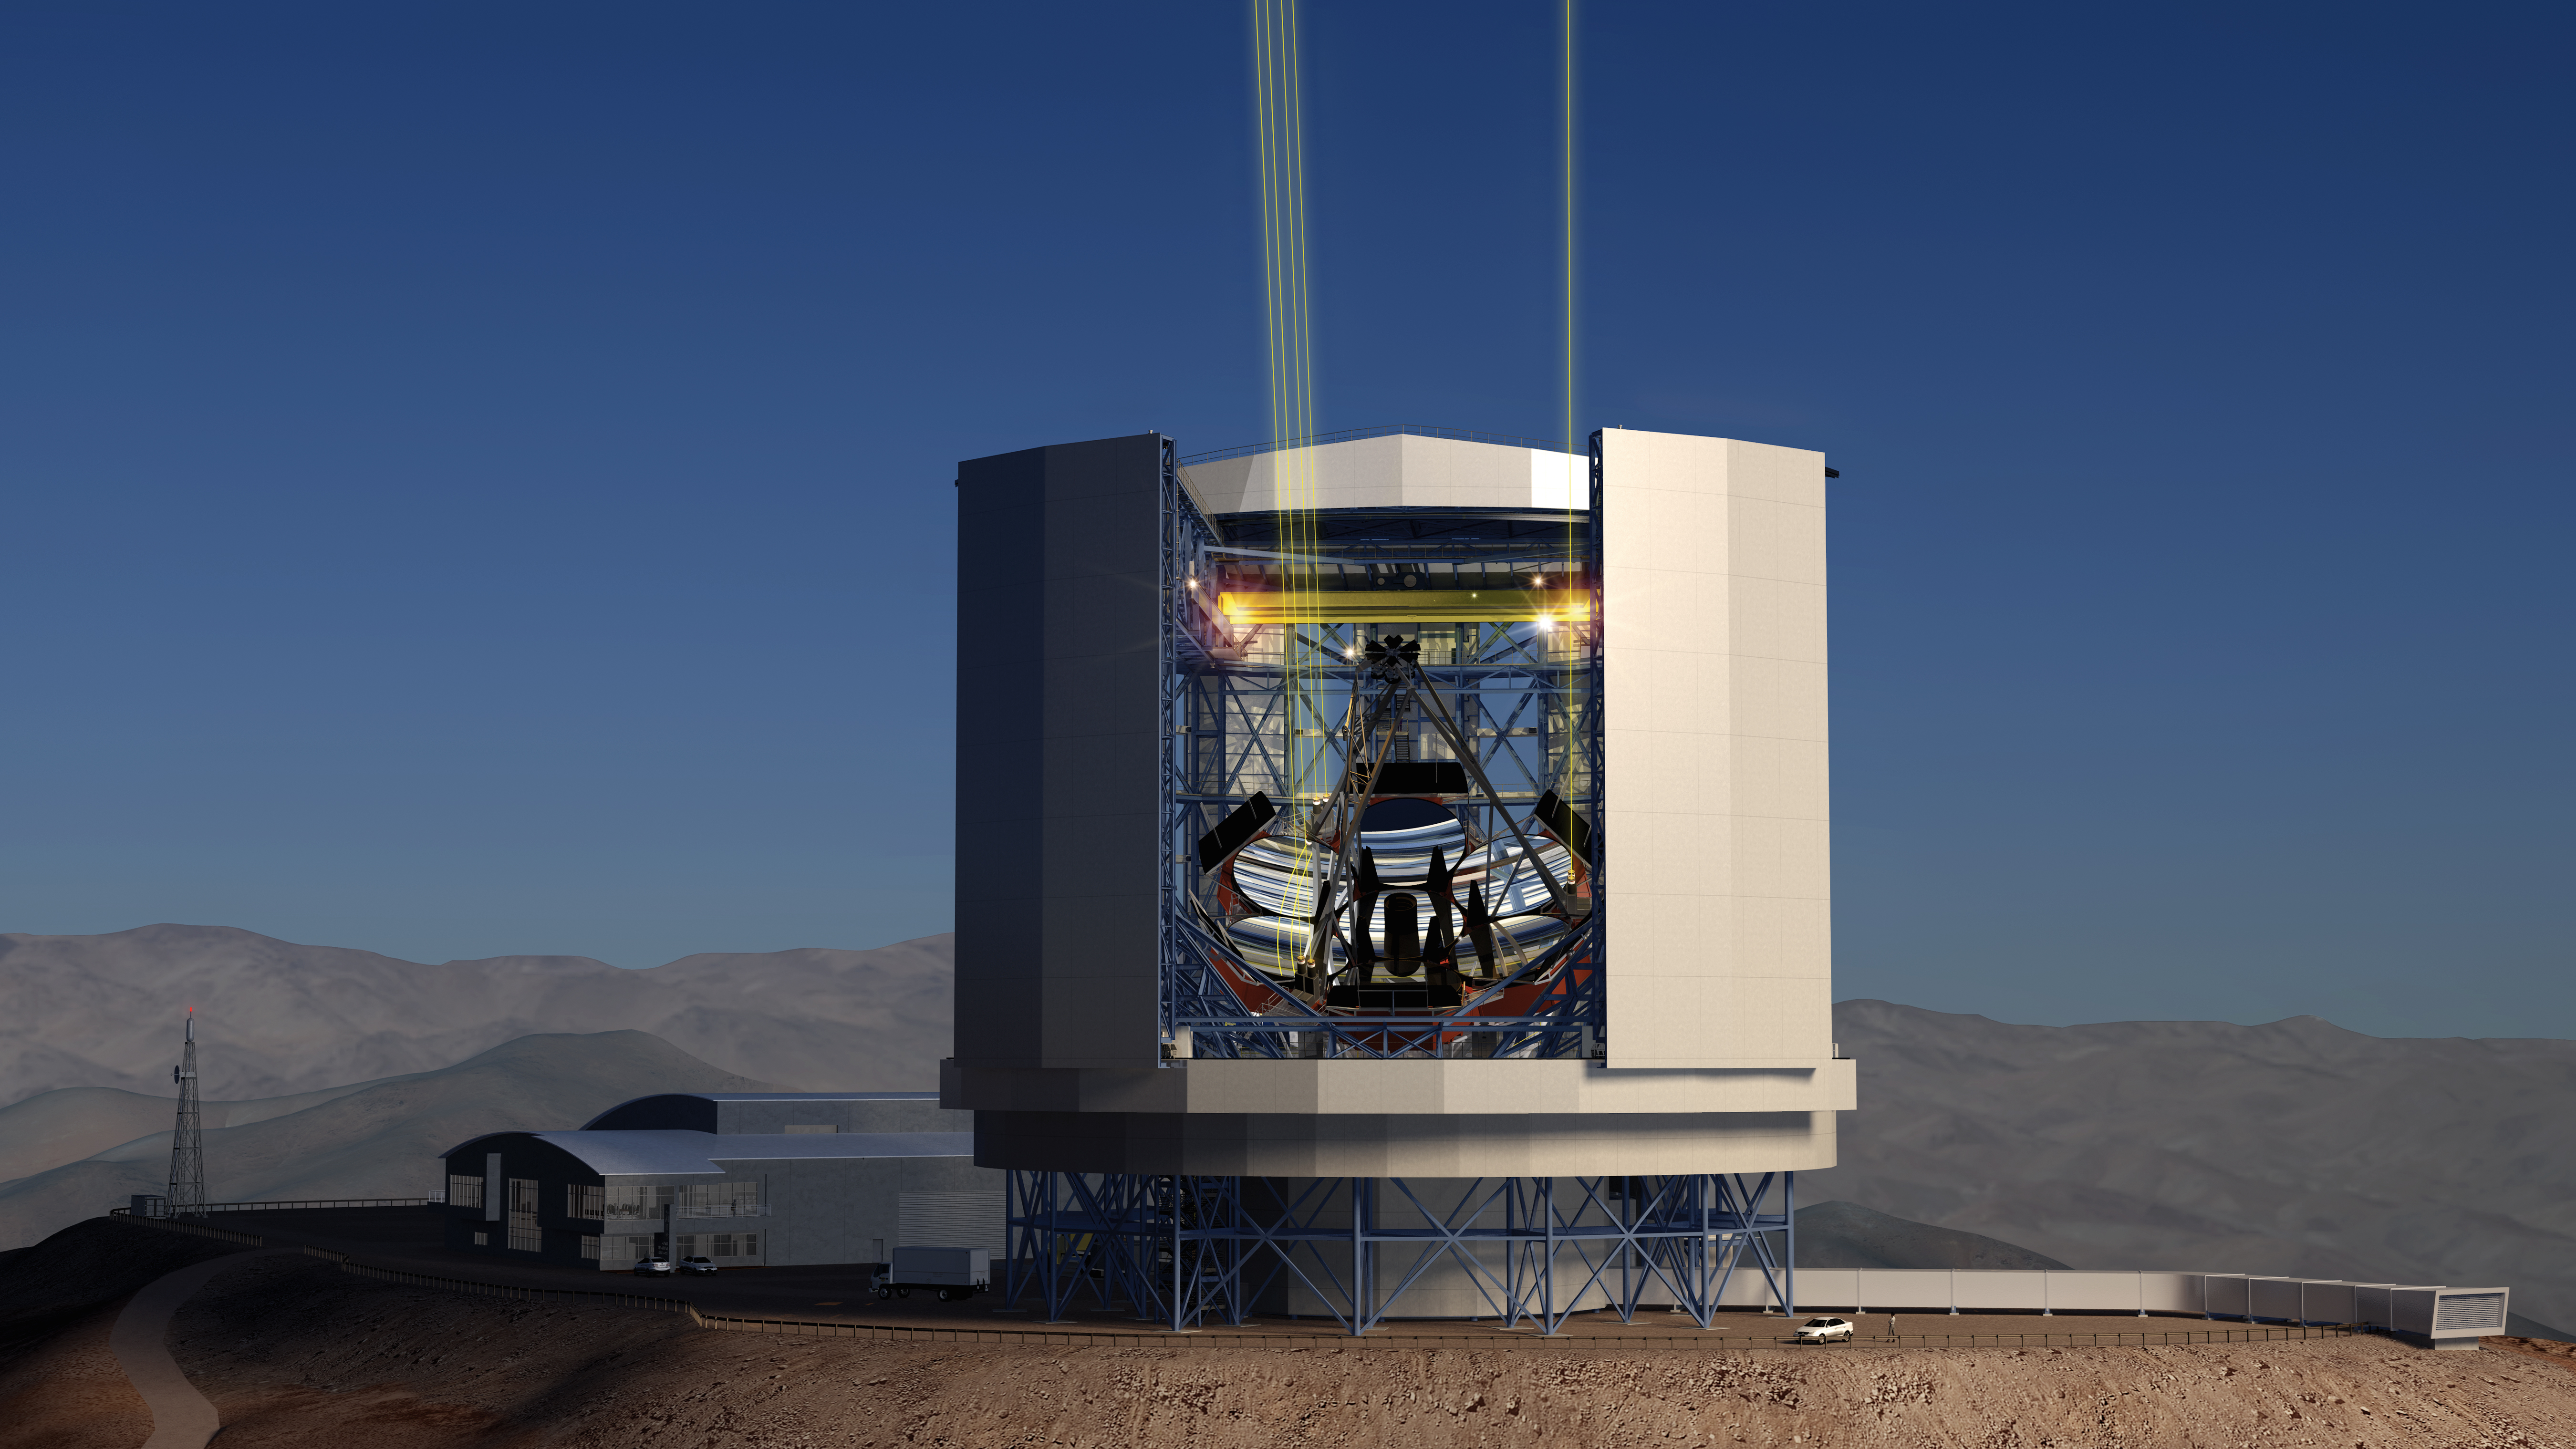 Astronomers hope the Giant Magellan Telescope will reveal the faintest objects ever seen in space, including extremely distant and ancient galaxies. (Photo courtesy the Giant Magellan Telescope Organization)